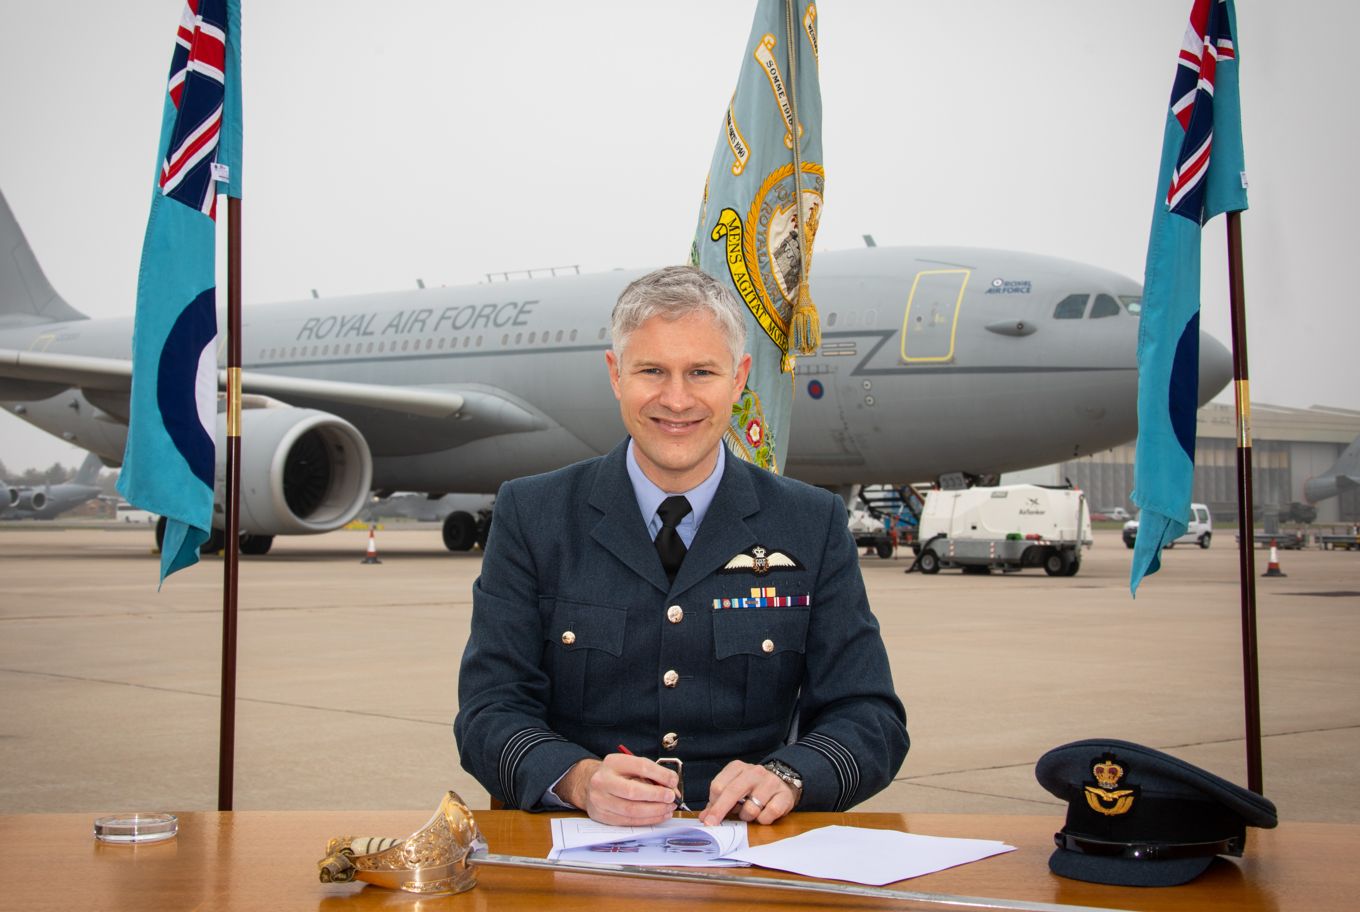 Wing Commander Udall signing a document at a table outside, with the Airbus Tanker Aircraft in the background. 